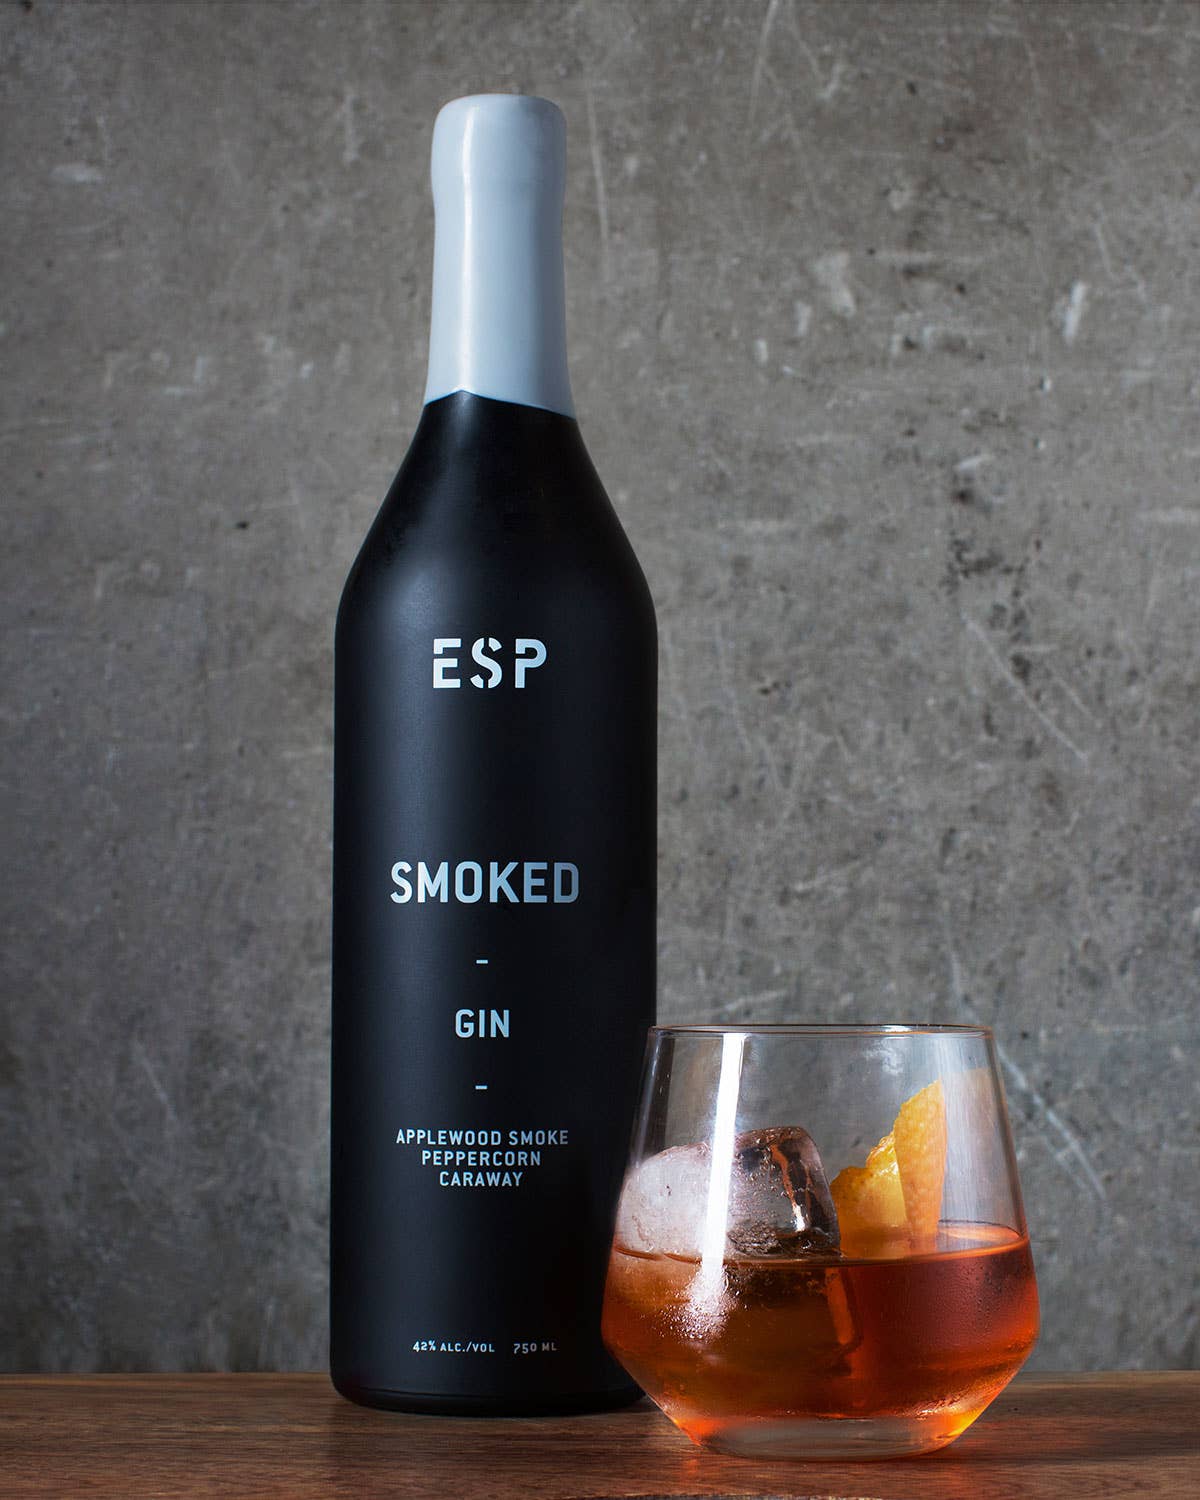 A Former Fine Dining Chef Launches America’s First Smoked Gin